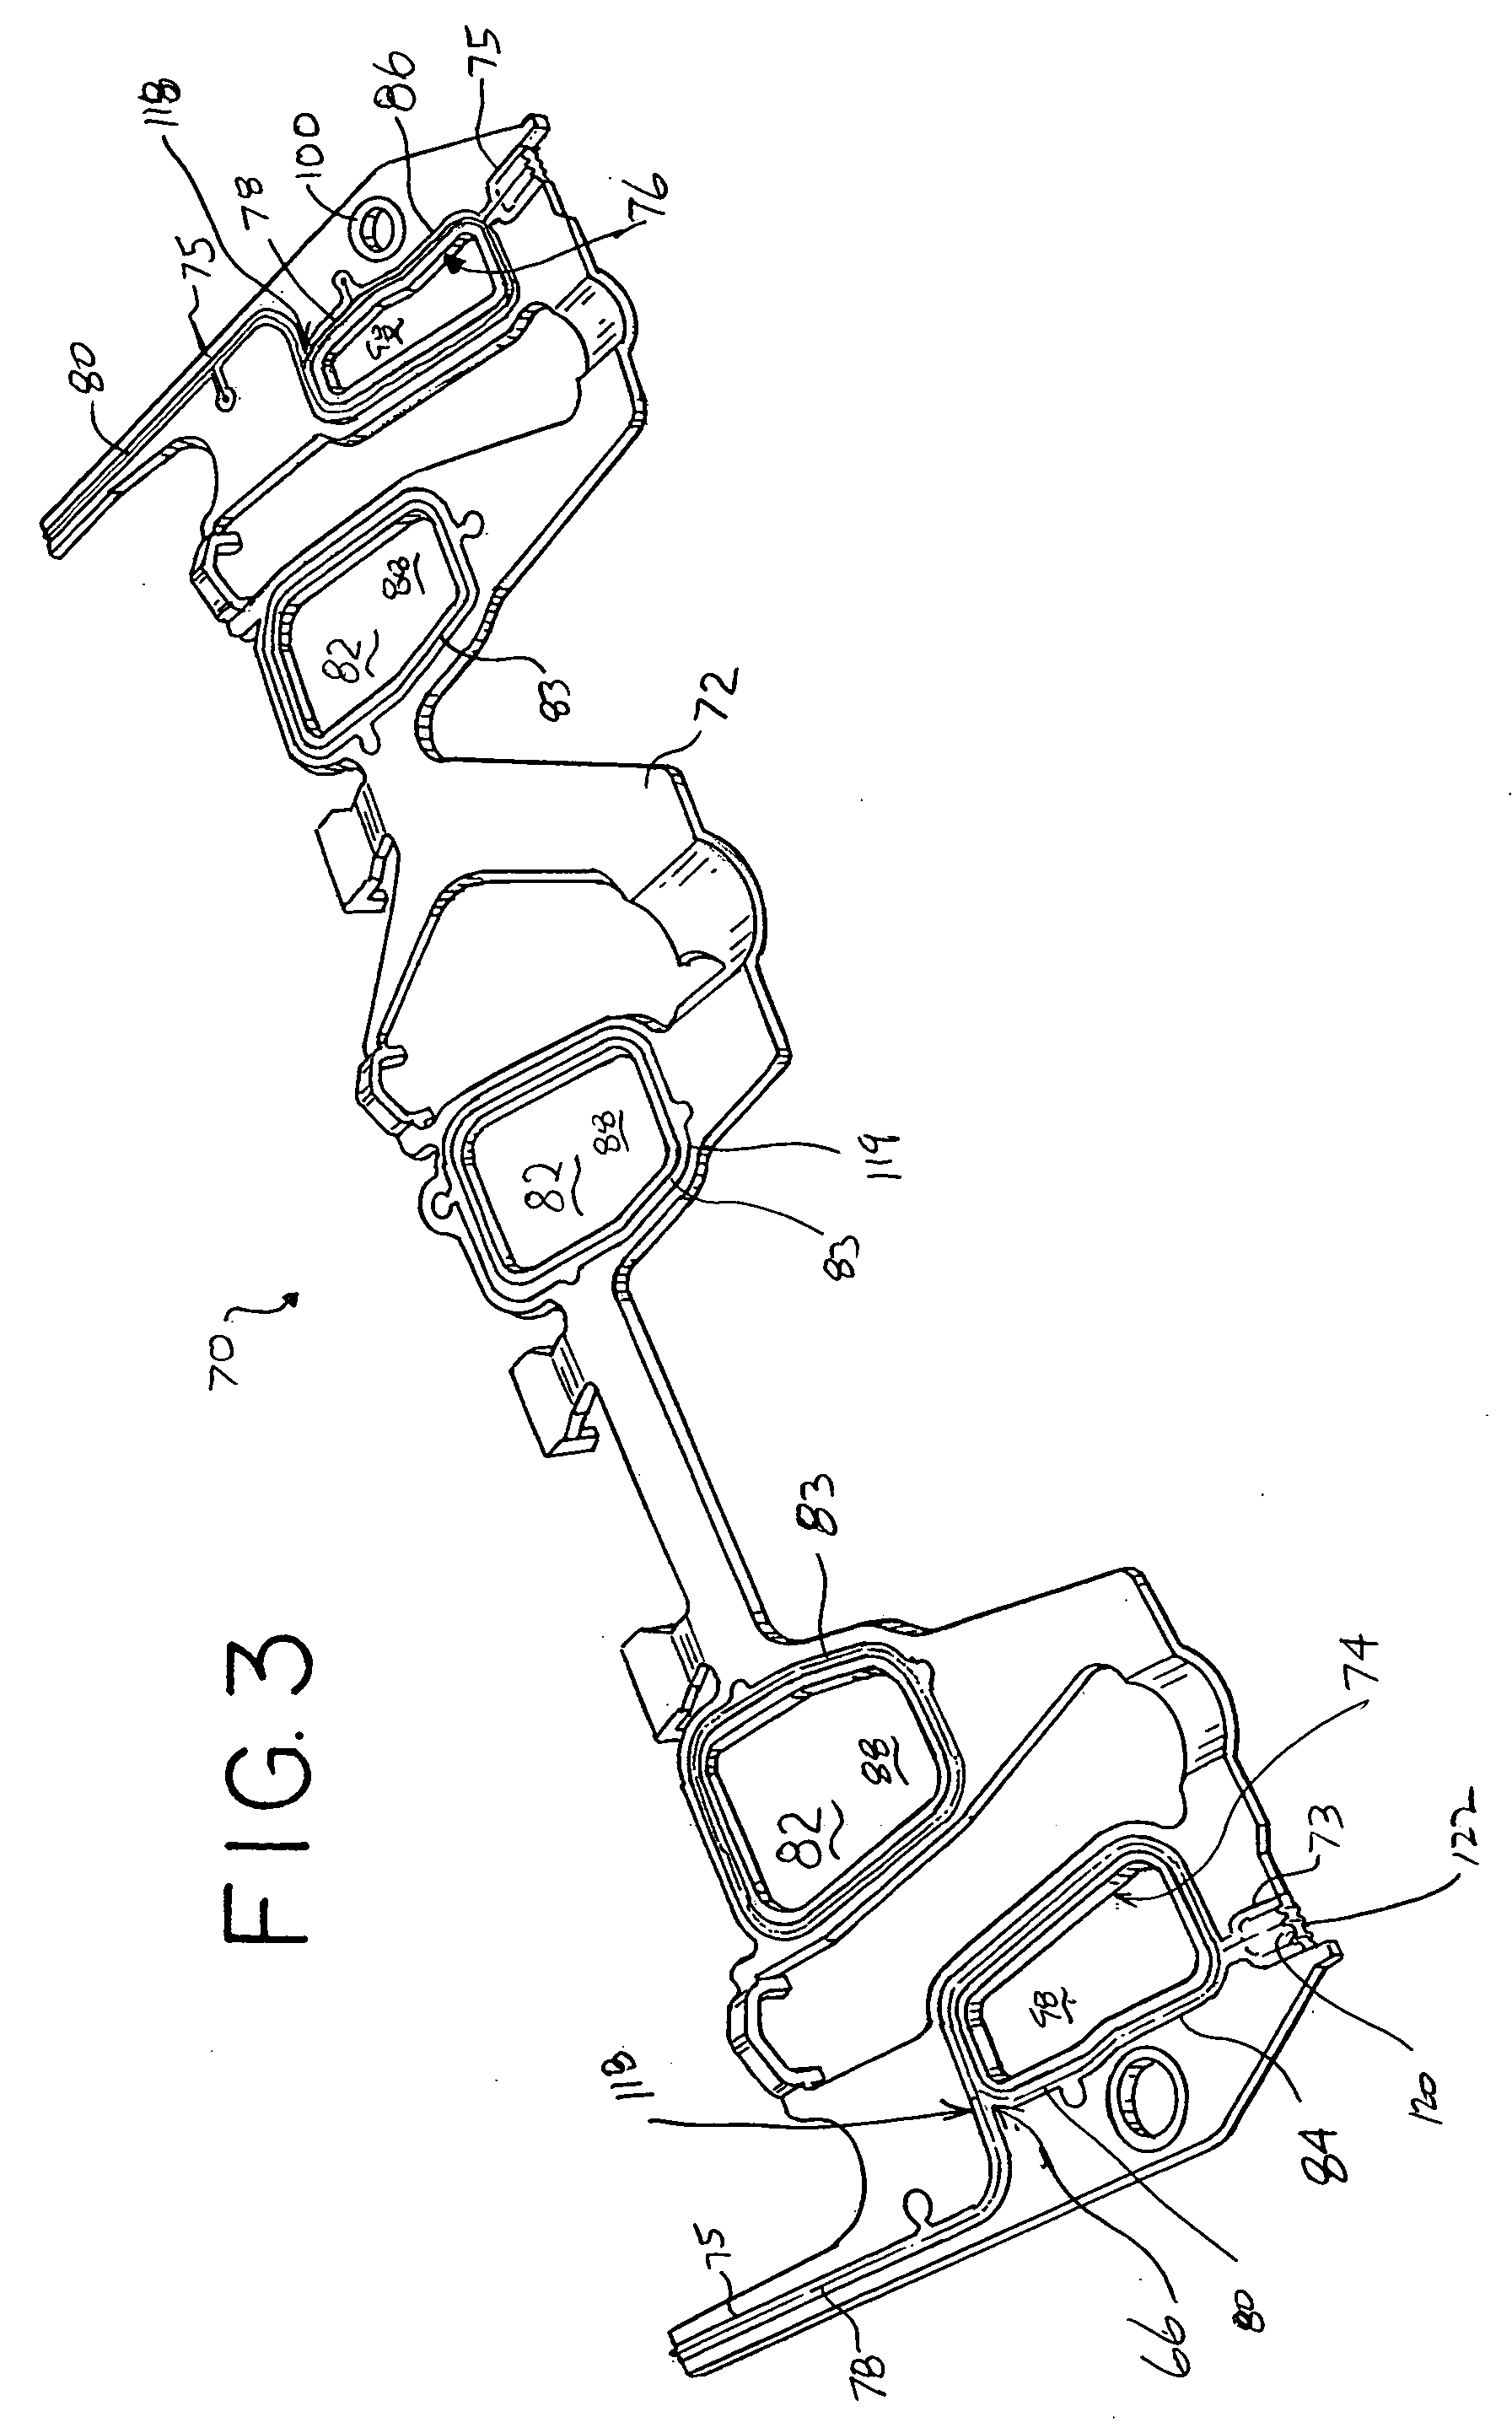 Gasket assembly and method